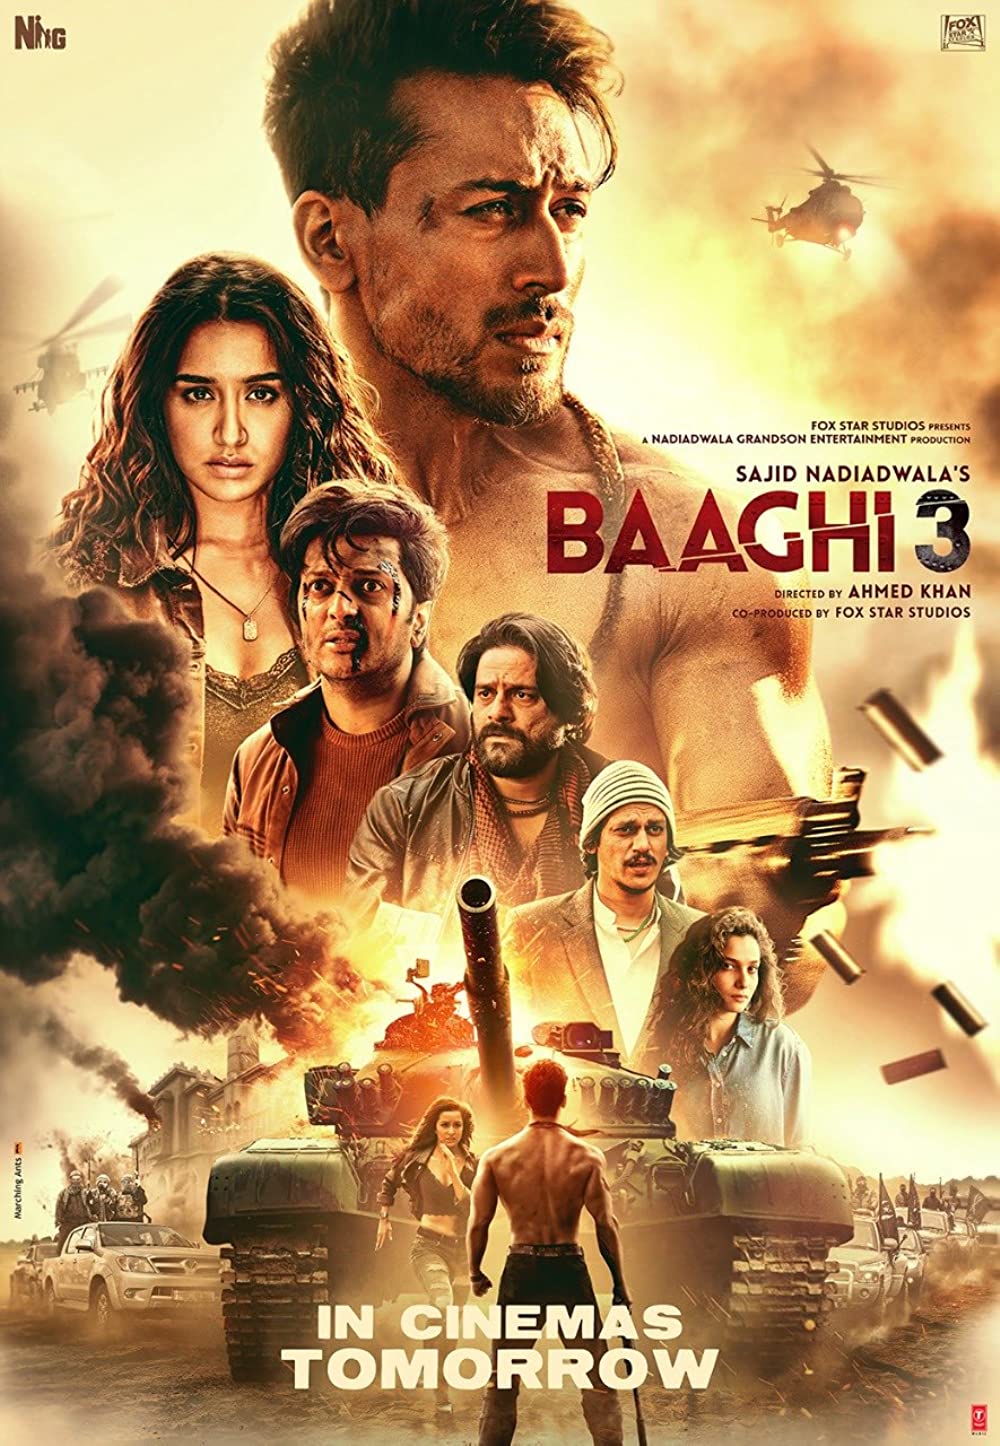 Baaghi 3 Movie Poster